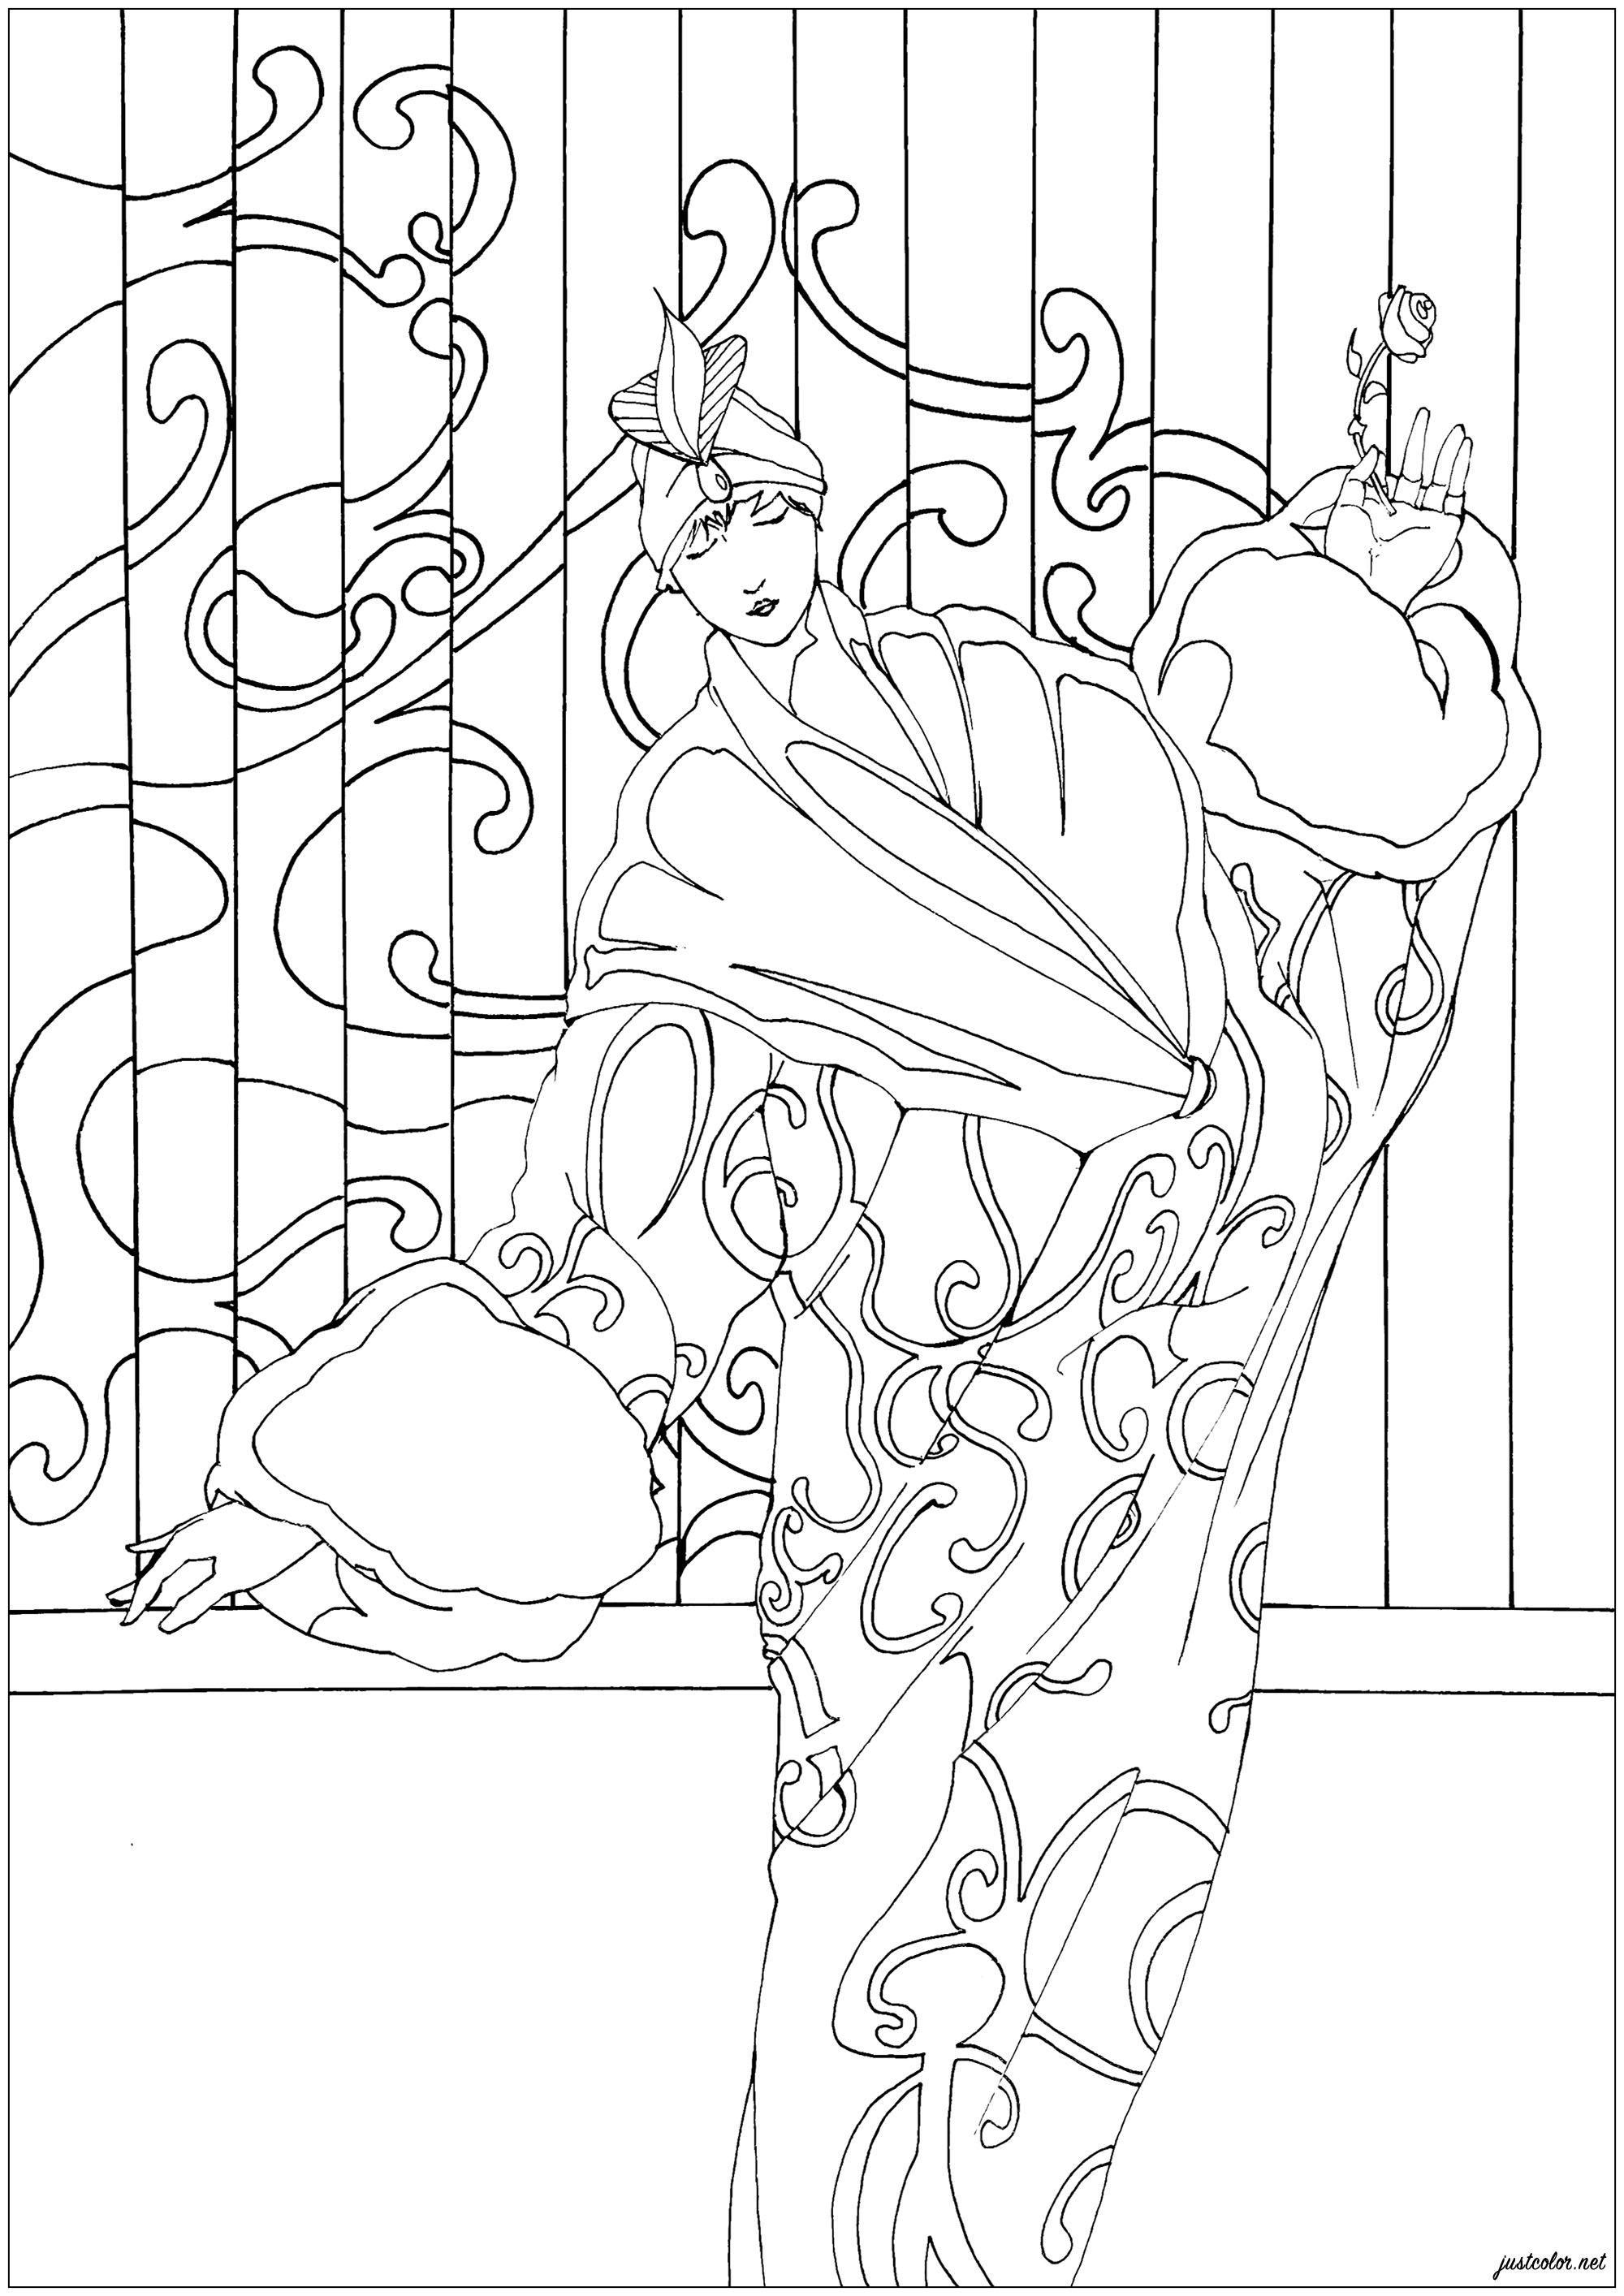 Coloring page inspired by an Art Nouveau illustration representing an elegantly dressed woman, Artist : Amine